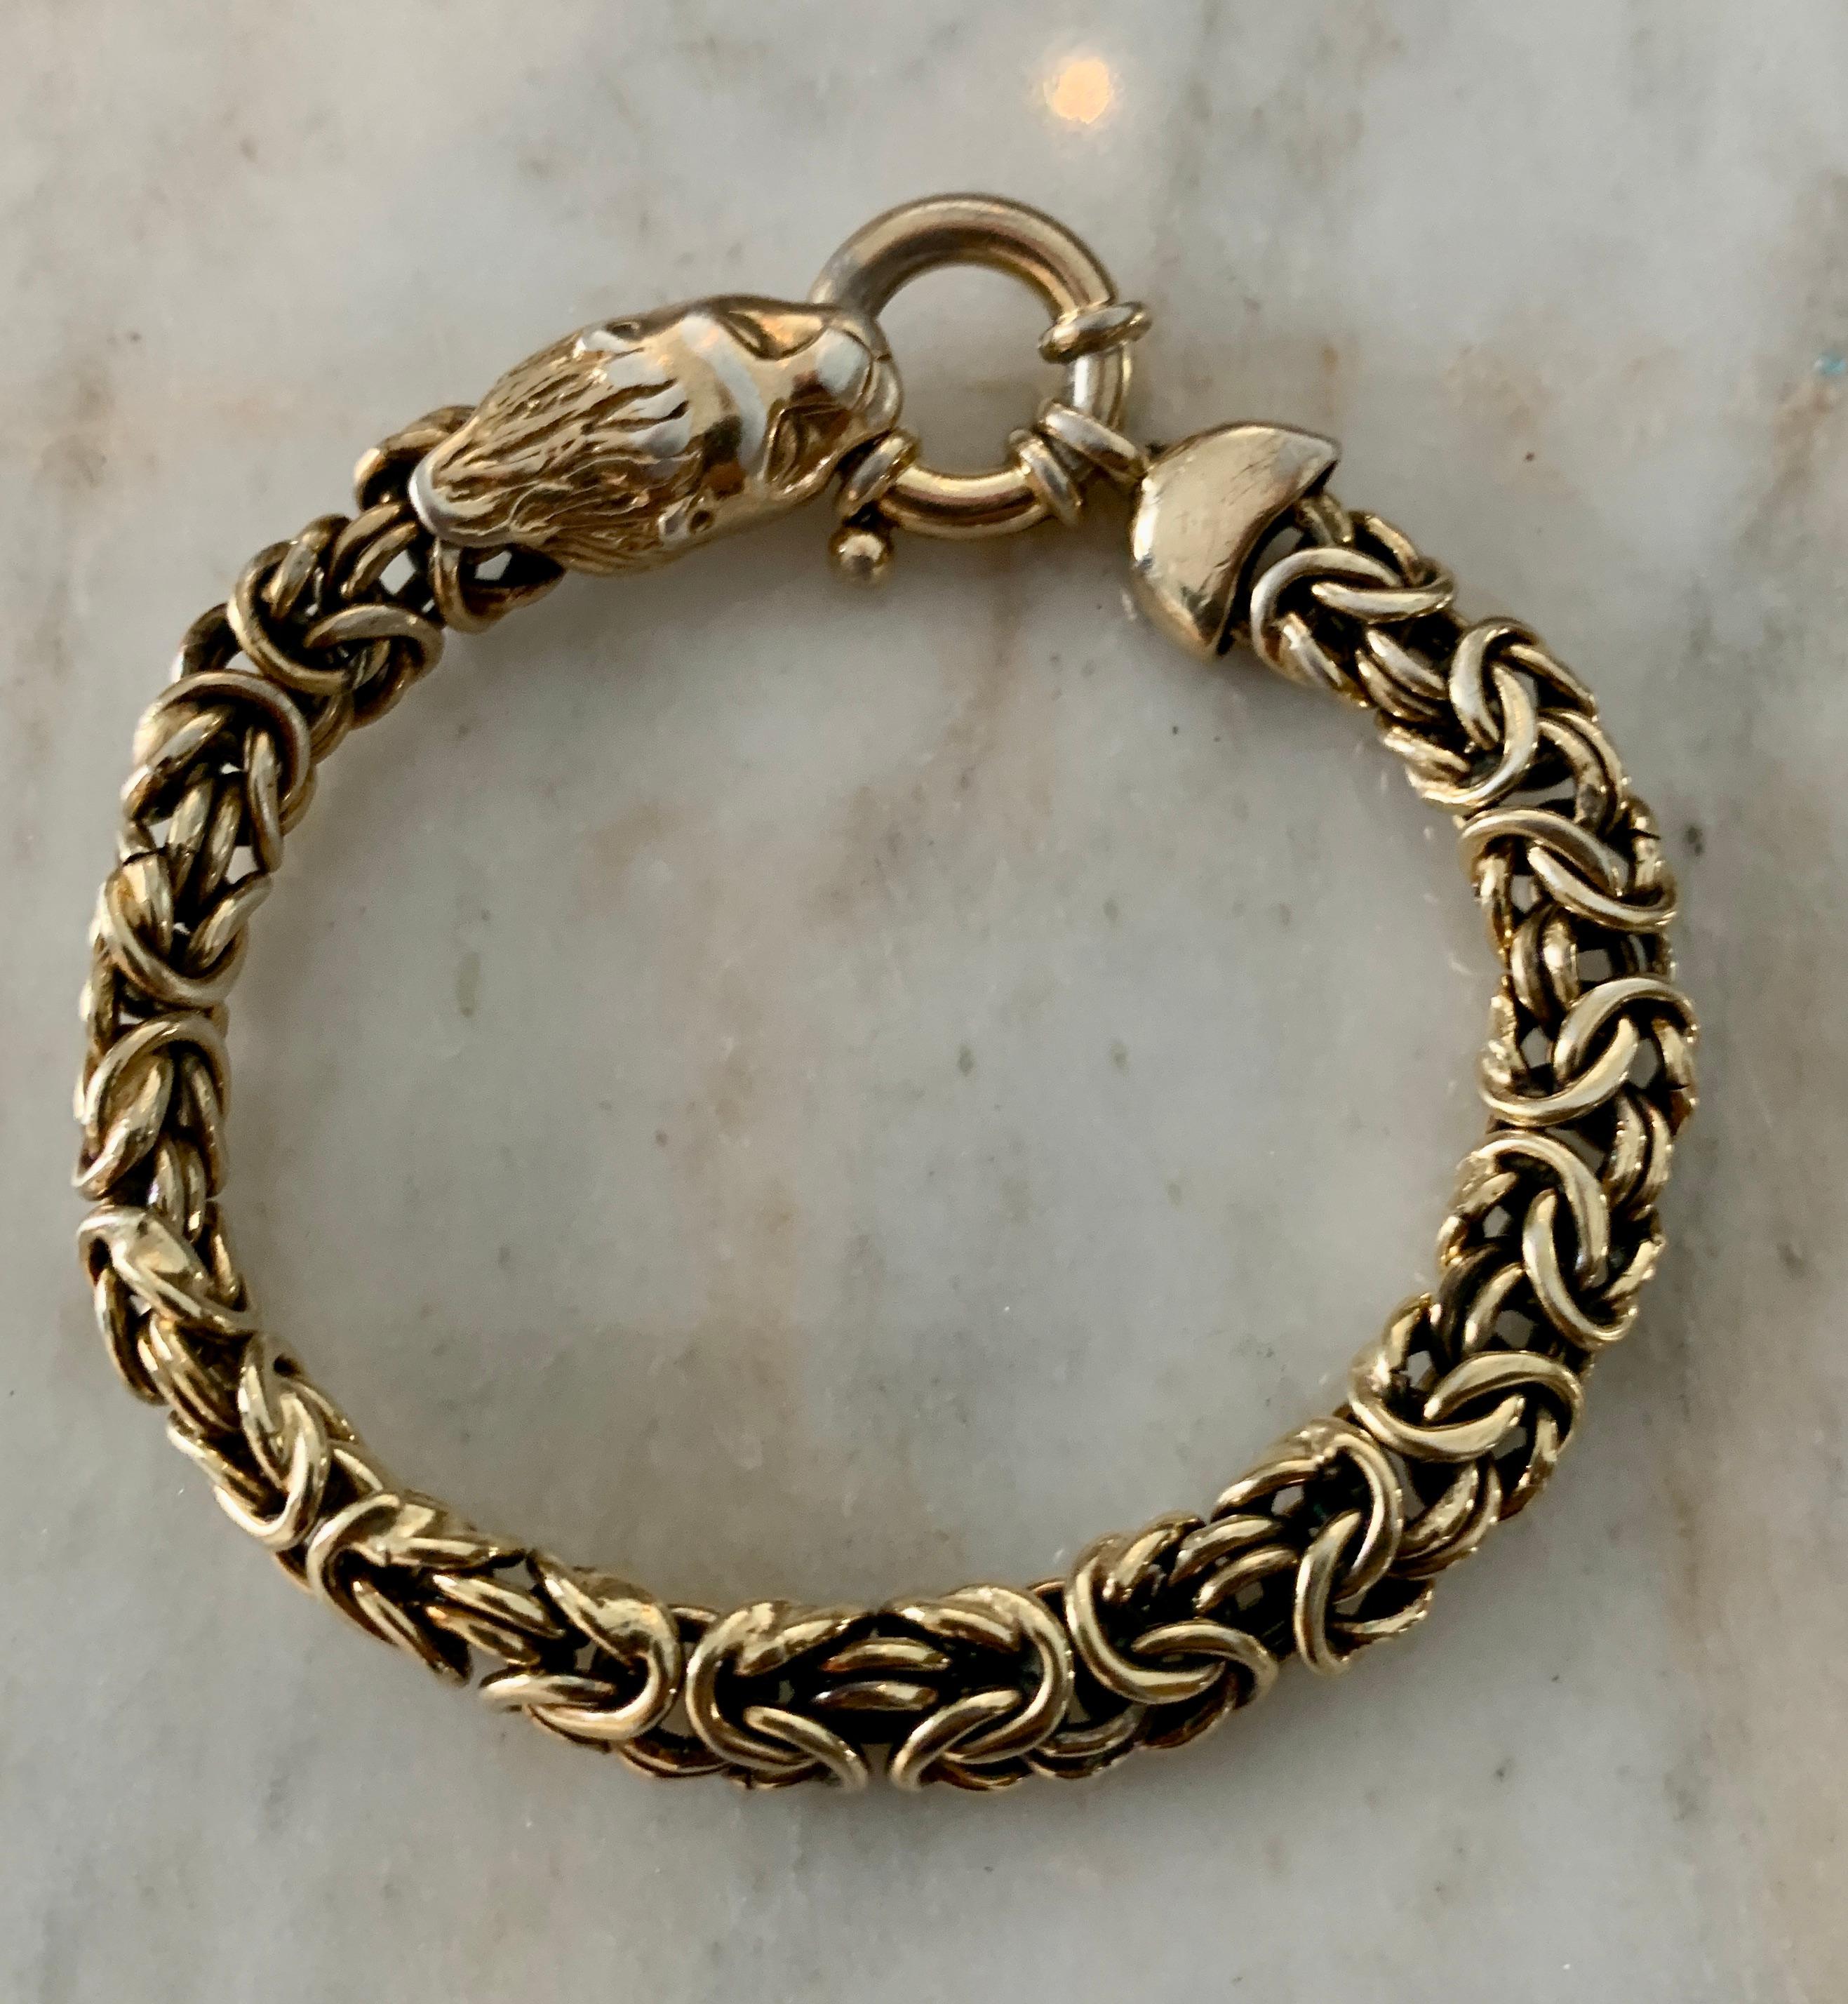 Rose Gold Chain Mail Bracelet with Lion Closure For Sale 1